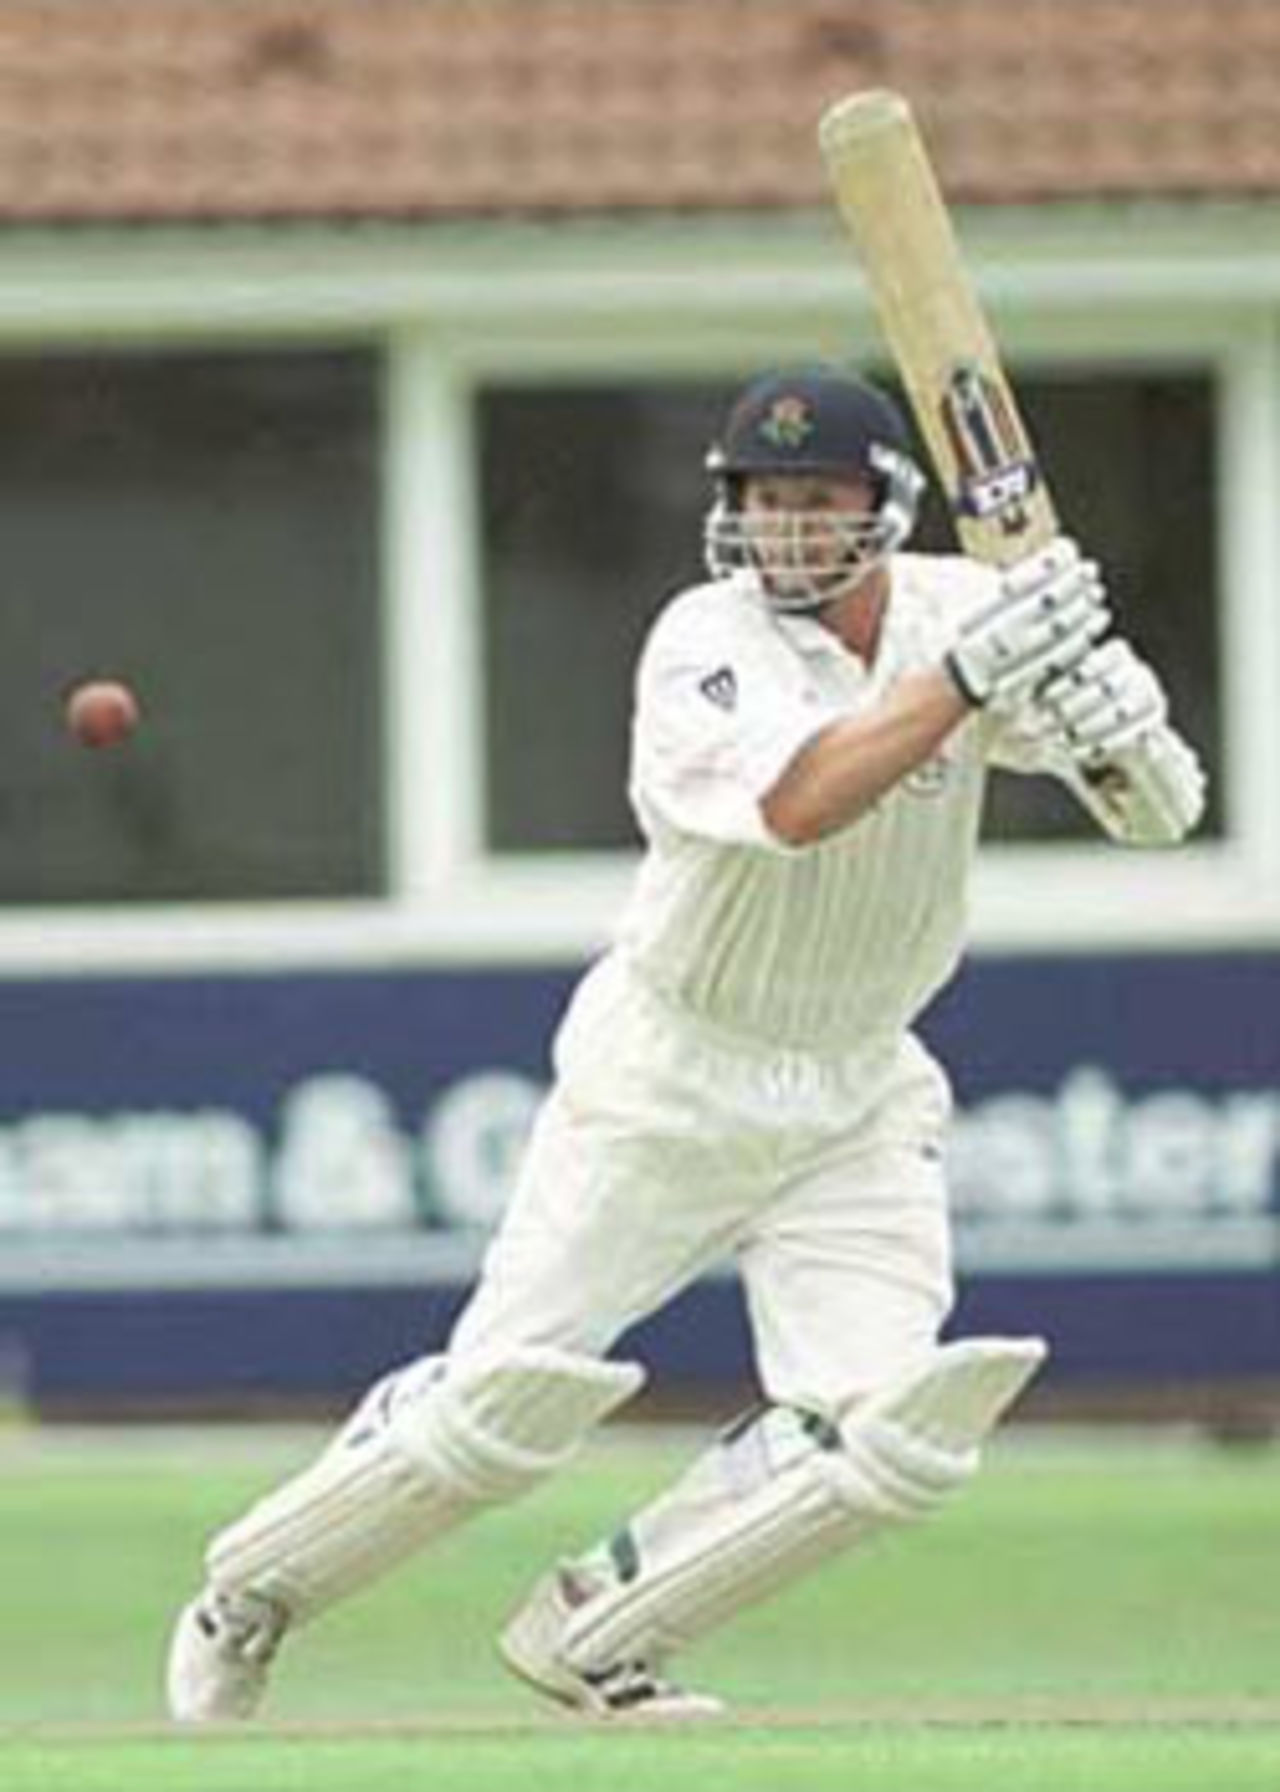 Richard Green takes off for a single on playing a drive, PPP healthcare County Championship Division One, 2000, Yorkshire v Lancashire, Headingley, Leeds, 28-31 July 2000.